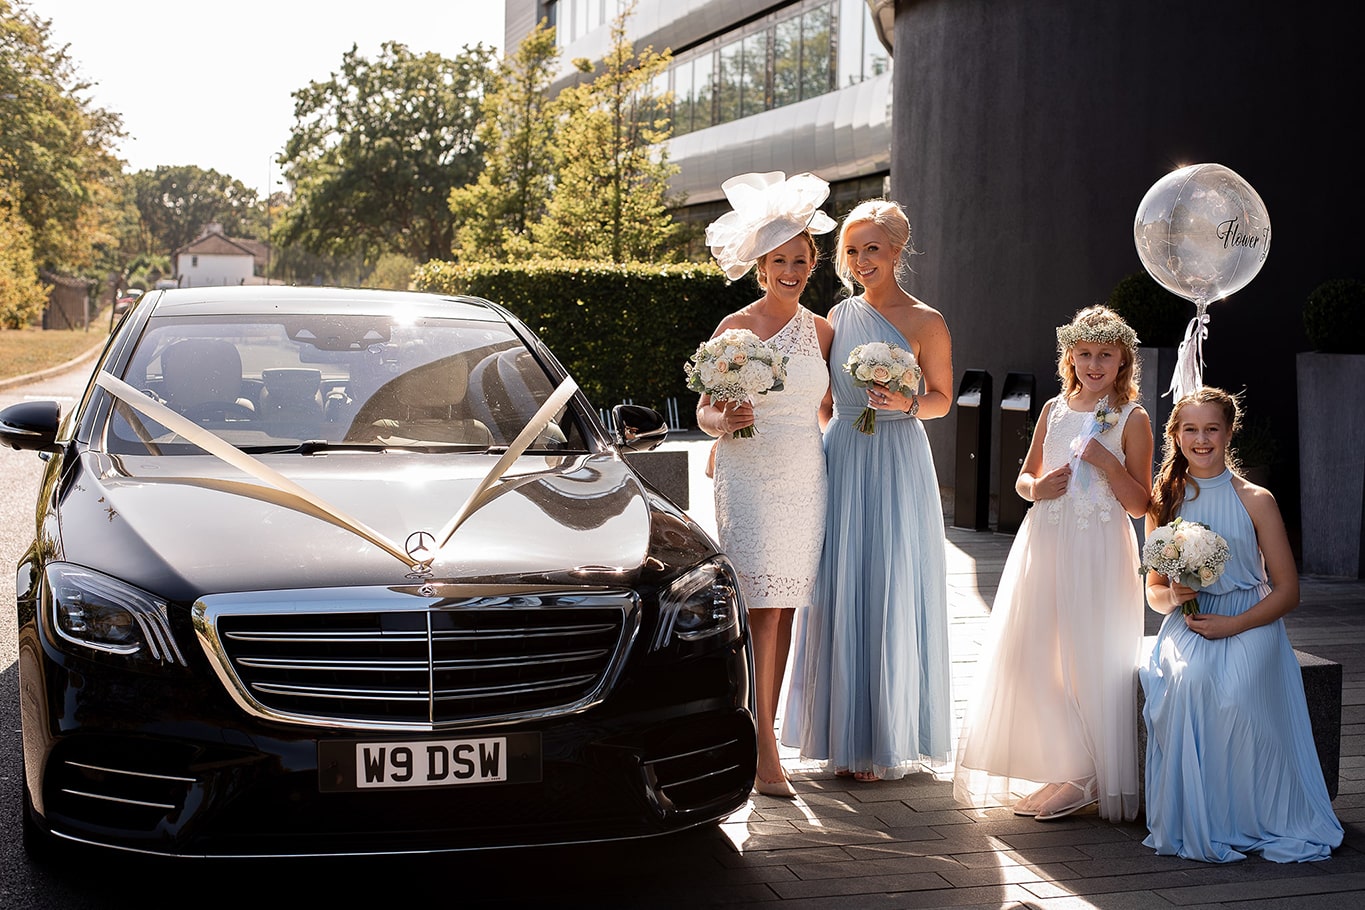 Bride and bridesmaids standing outside next to wedding balloon and black Mercedes wedding car